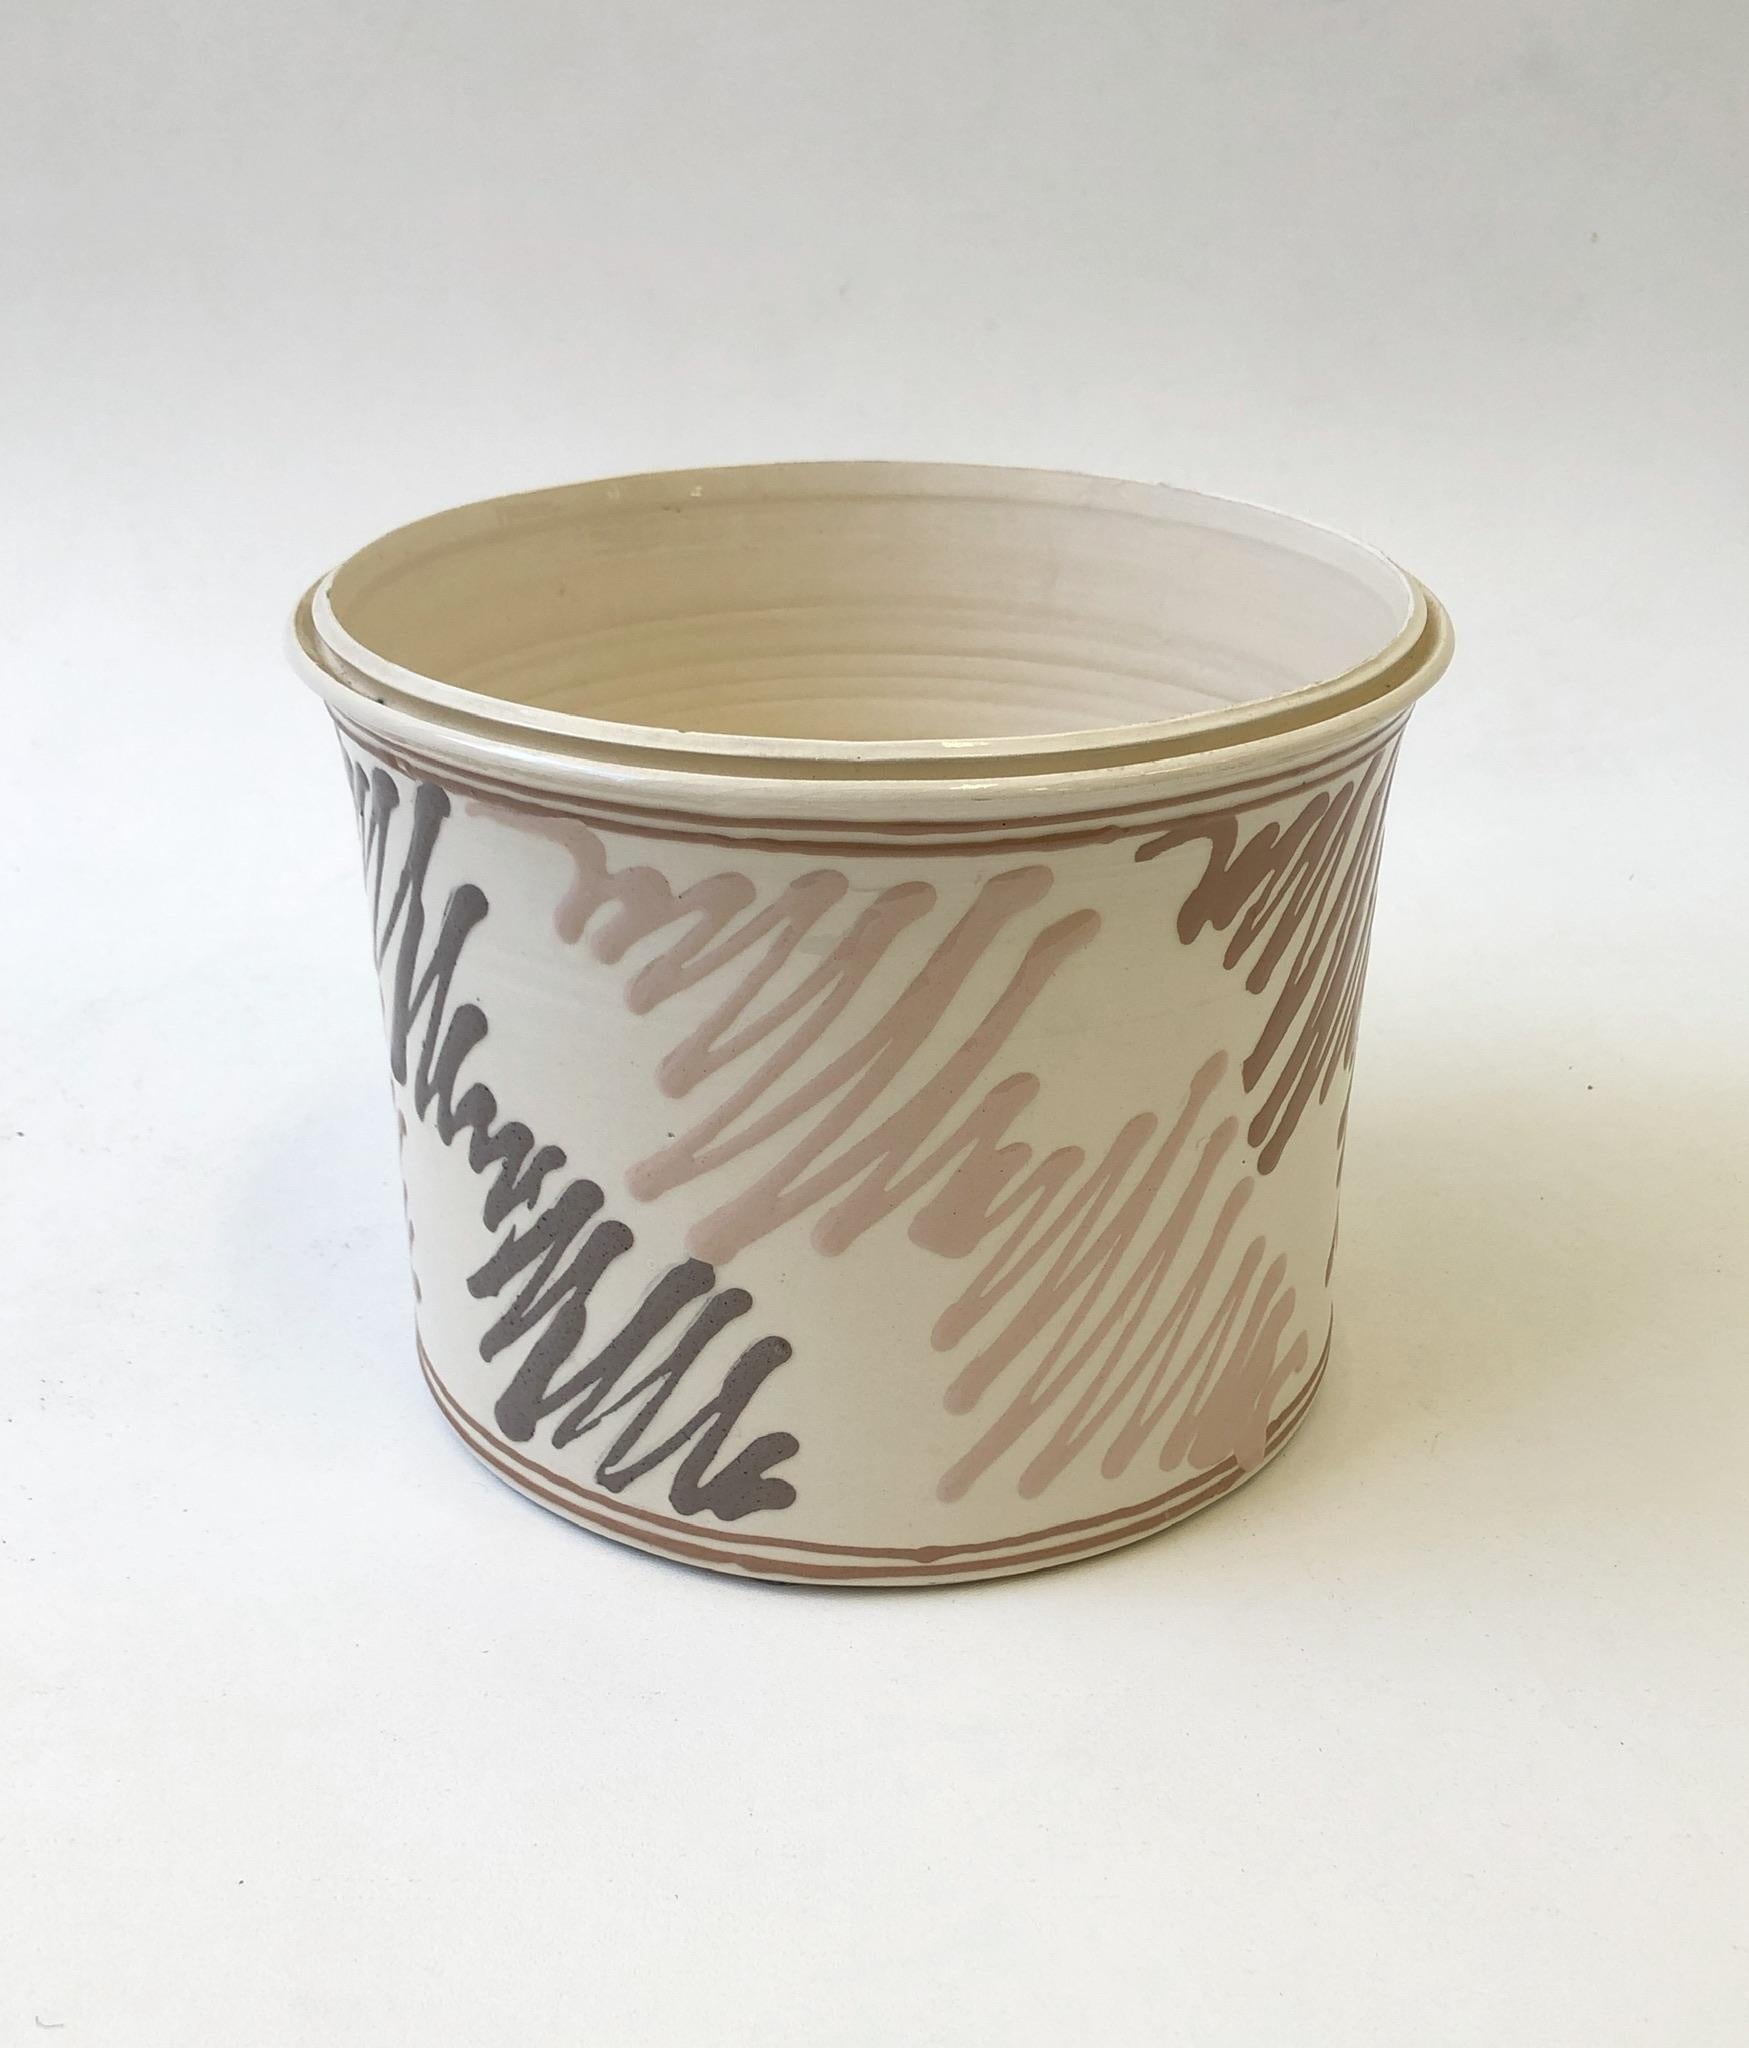 A rare studio ceramic planter or vase design by Roy Hamilton specially designed for Steve Chase in the 1980s. The planter has the Roy Hamilton mark on the side and hand signed and noted “specially designed for Steve Chase Associates” on the bottom